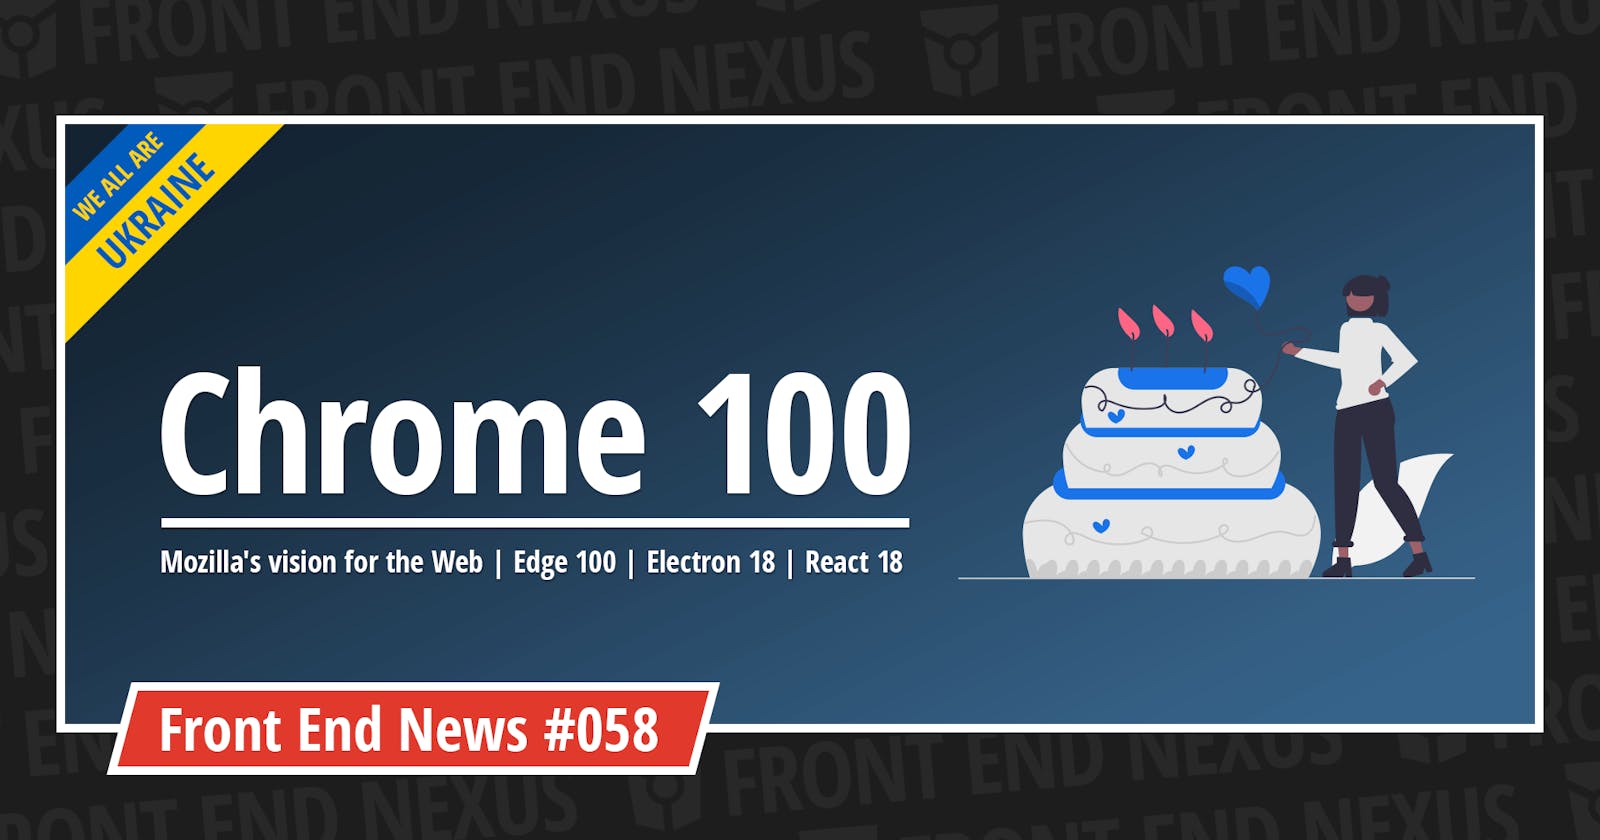 Chrome 100, Mozilla's vision for the Web, Jobs for UA designers and devs, Edge 100, Electron 18, React 18, and more | Front End News #058